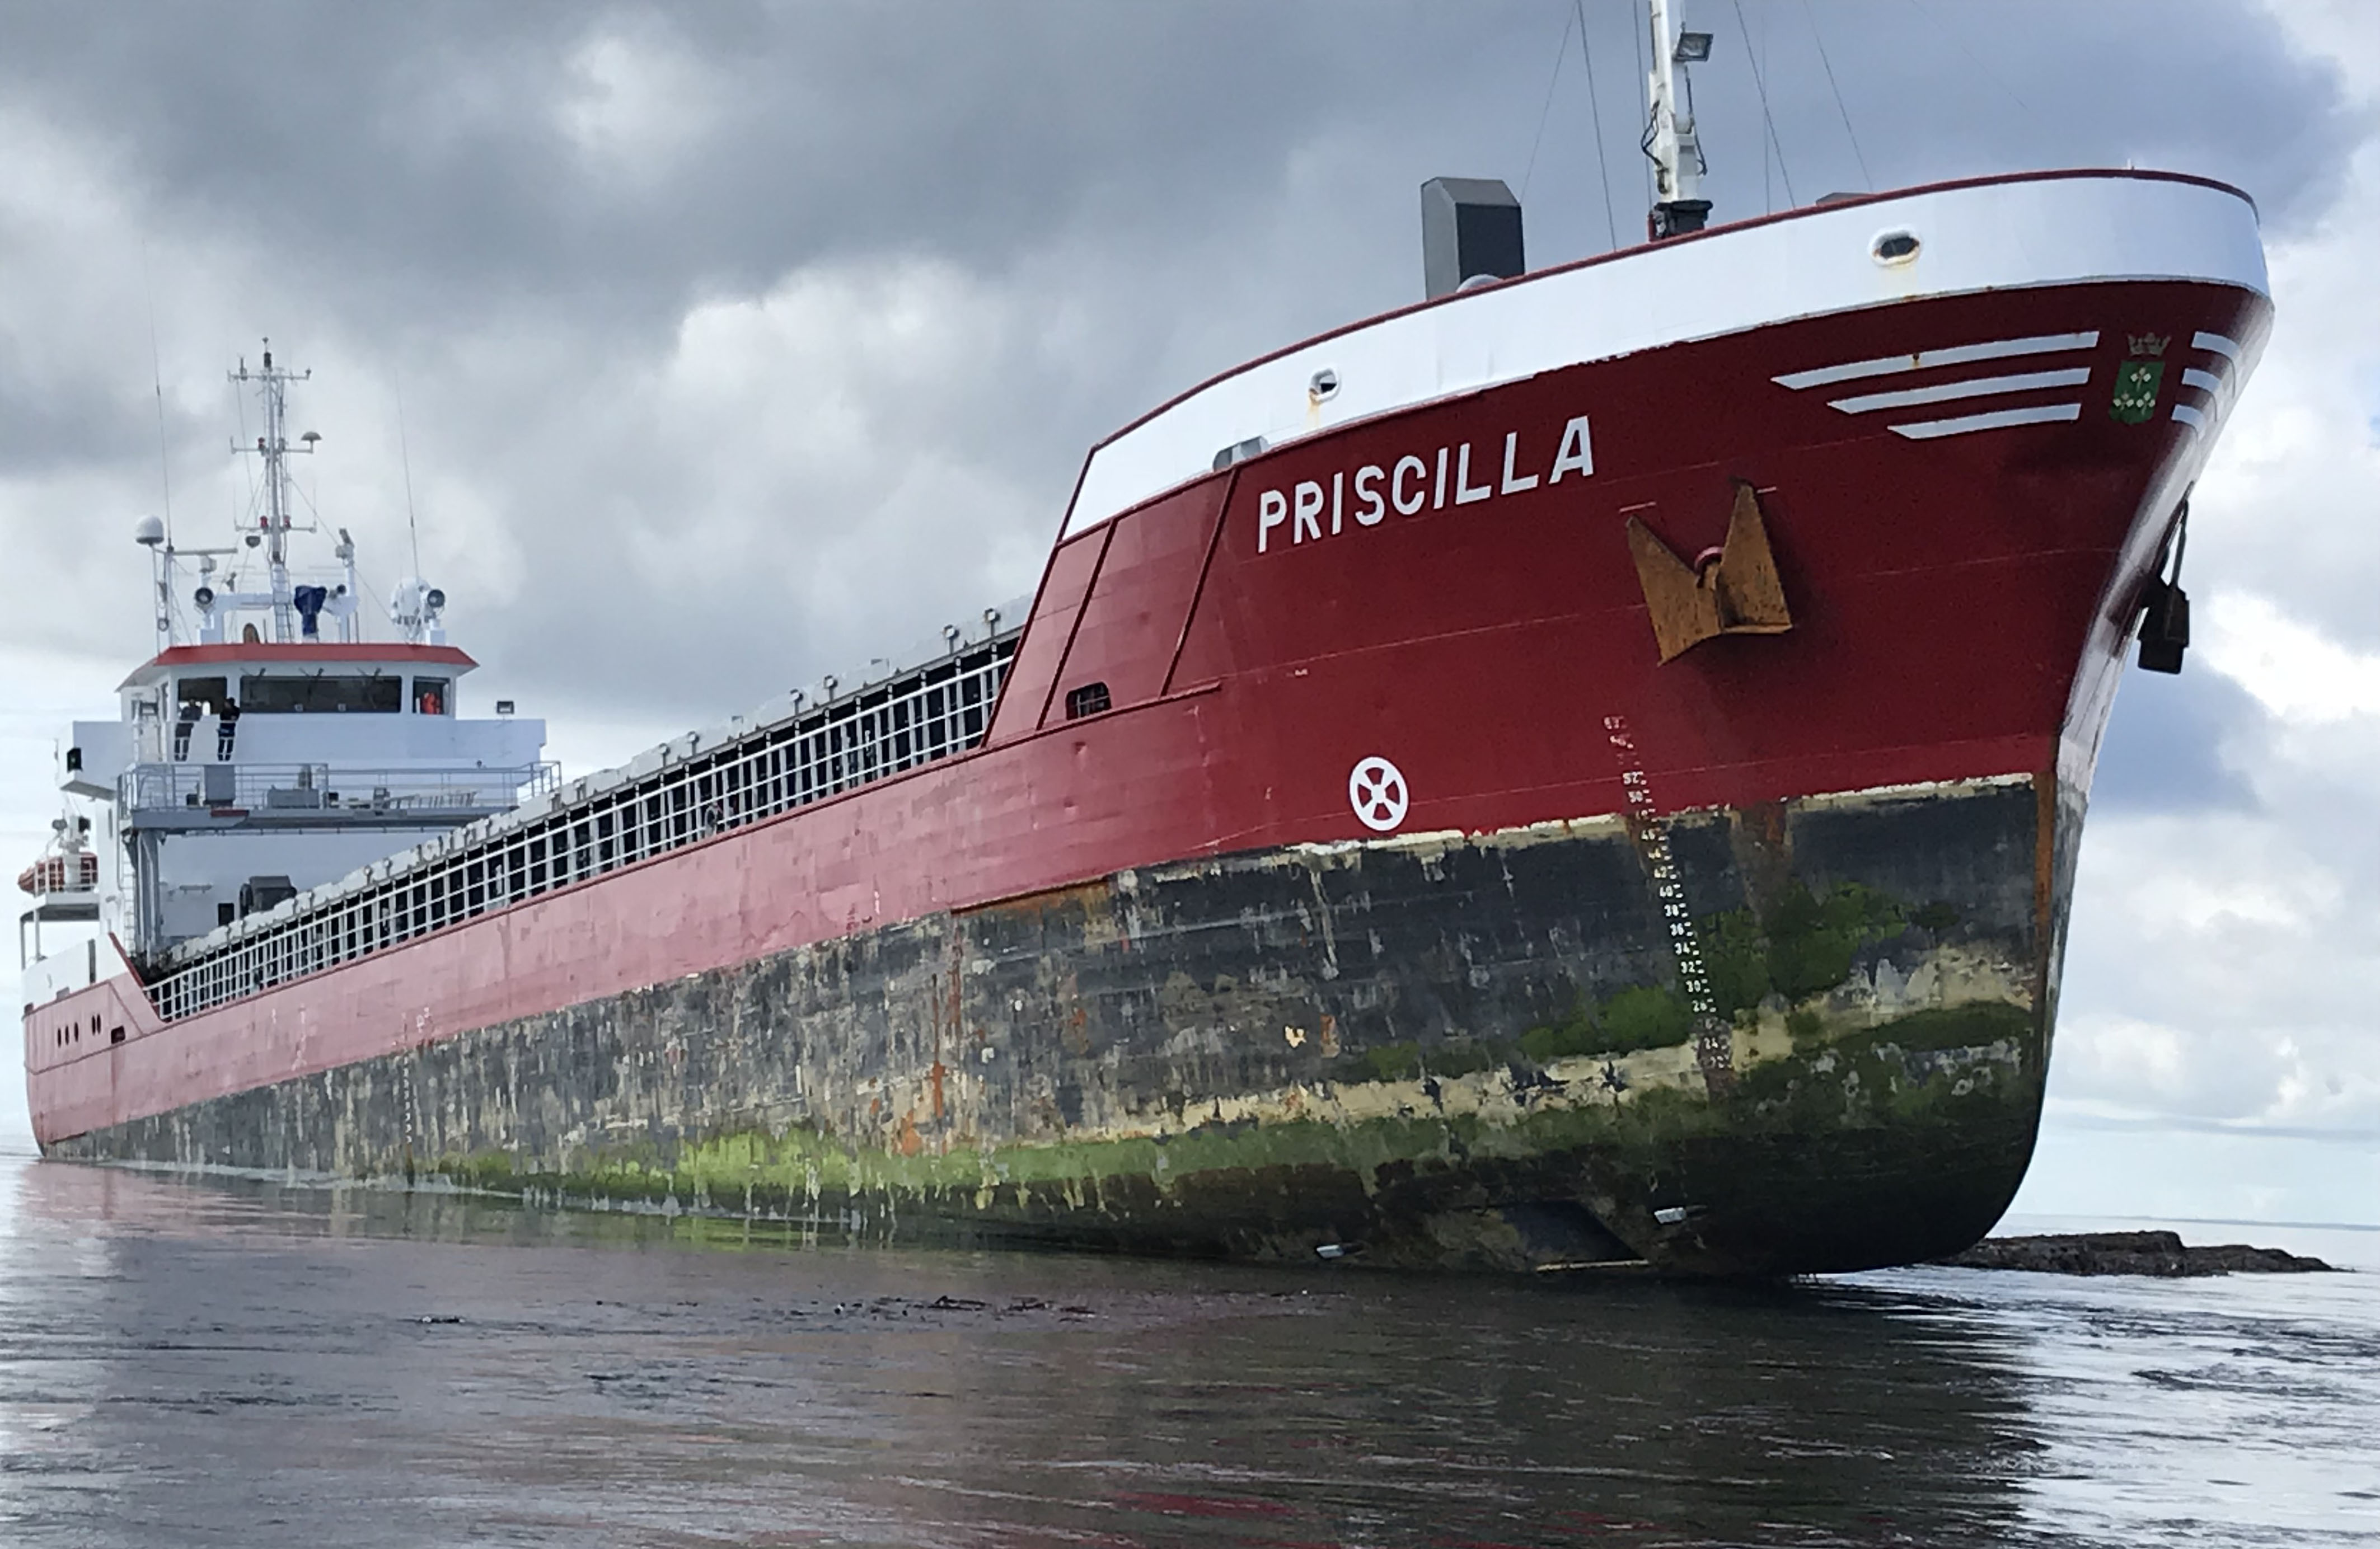 MV Priscilla grounded in the Pentland Skerries off Orkney.